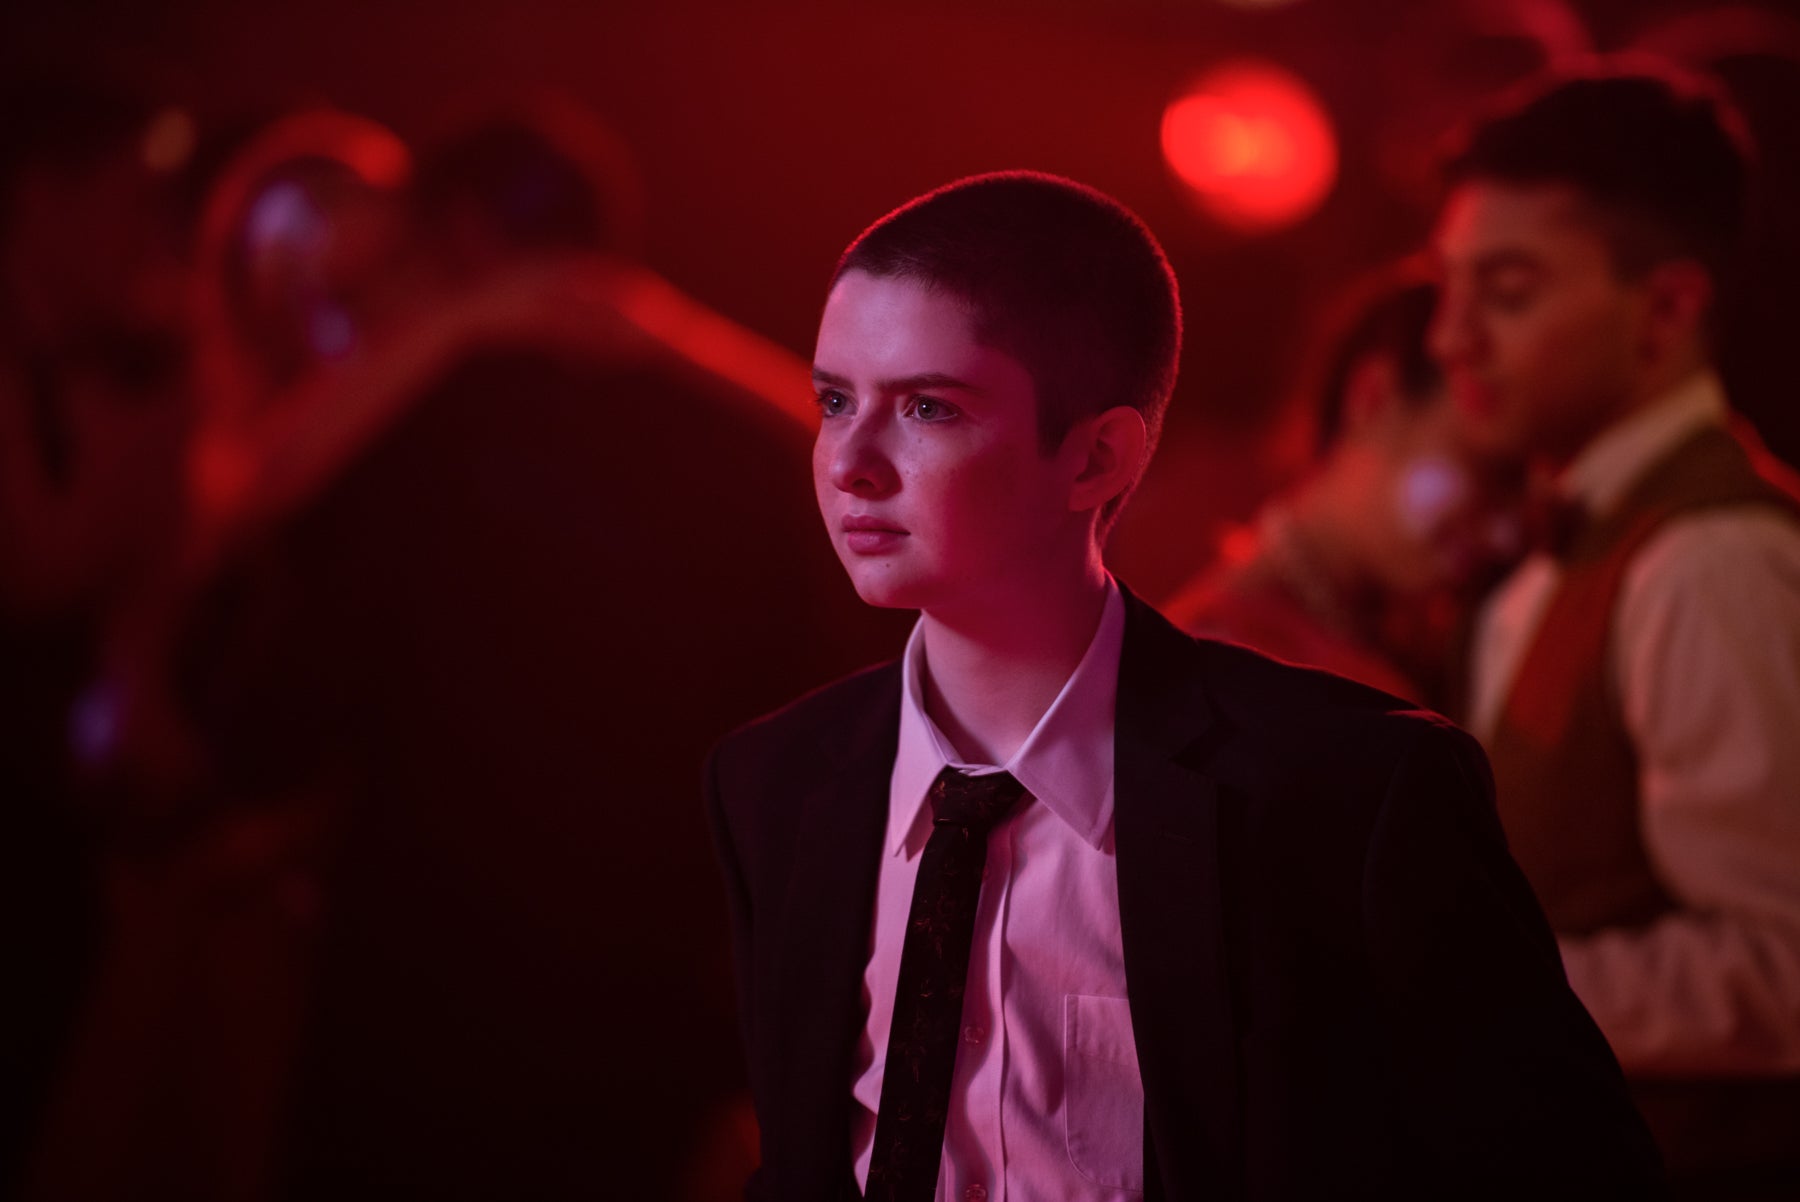 Theo, wearing a suit at the Valentine’s dance, looks off camera in a scene from Chilling Adventures of Sabrina.